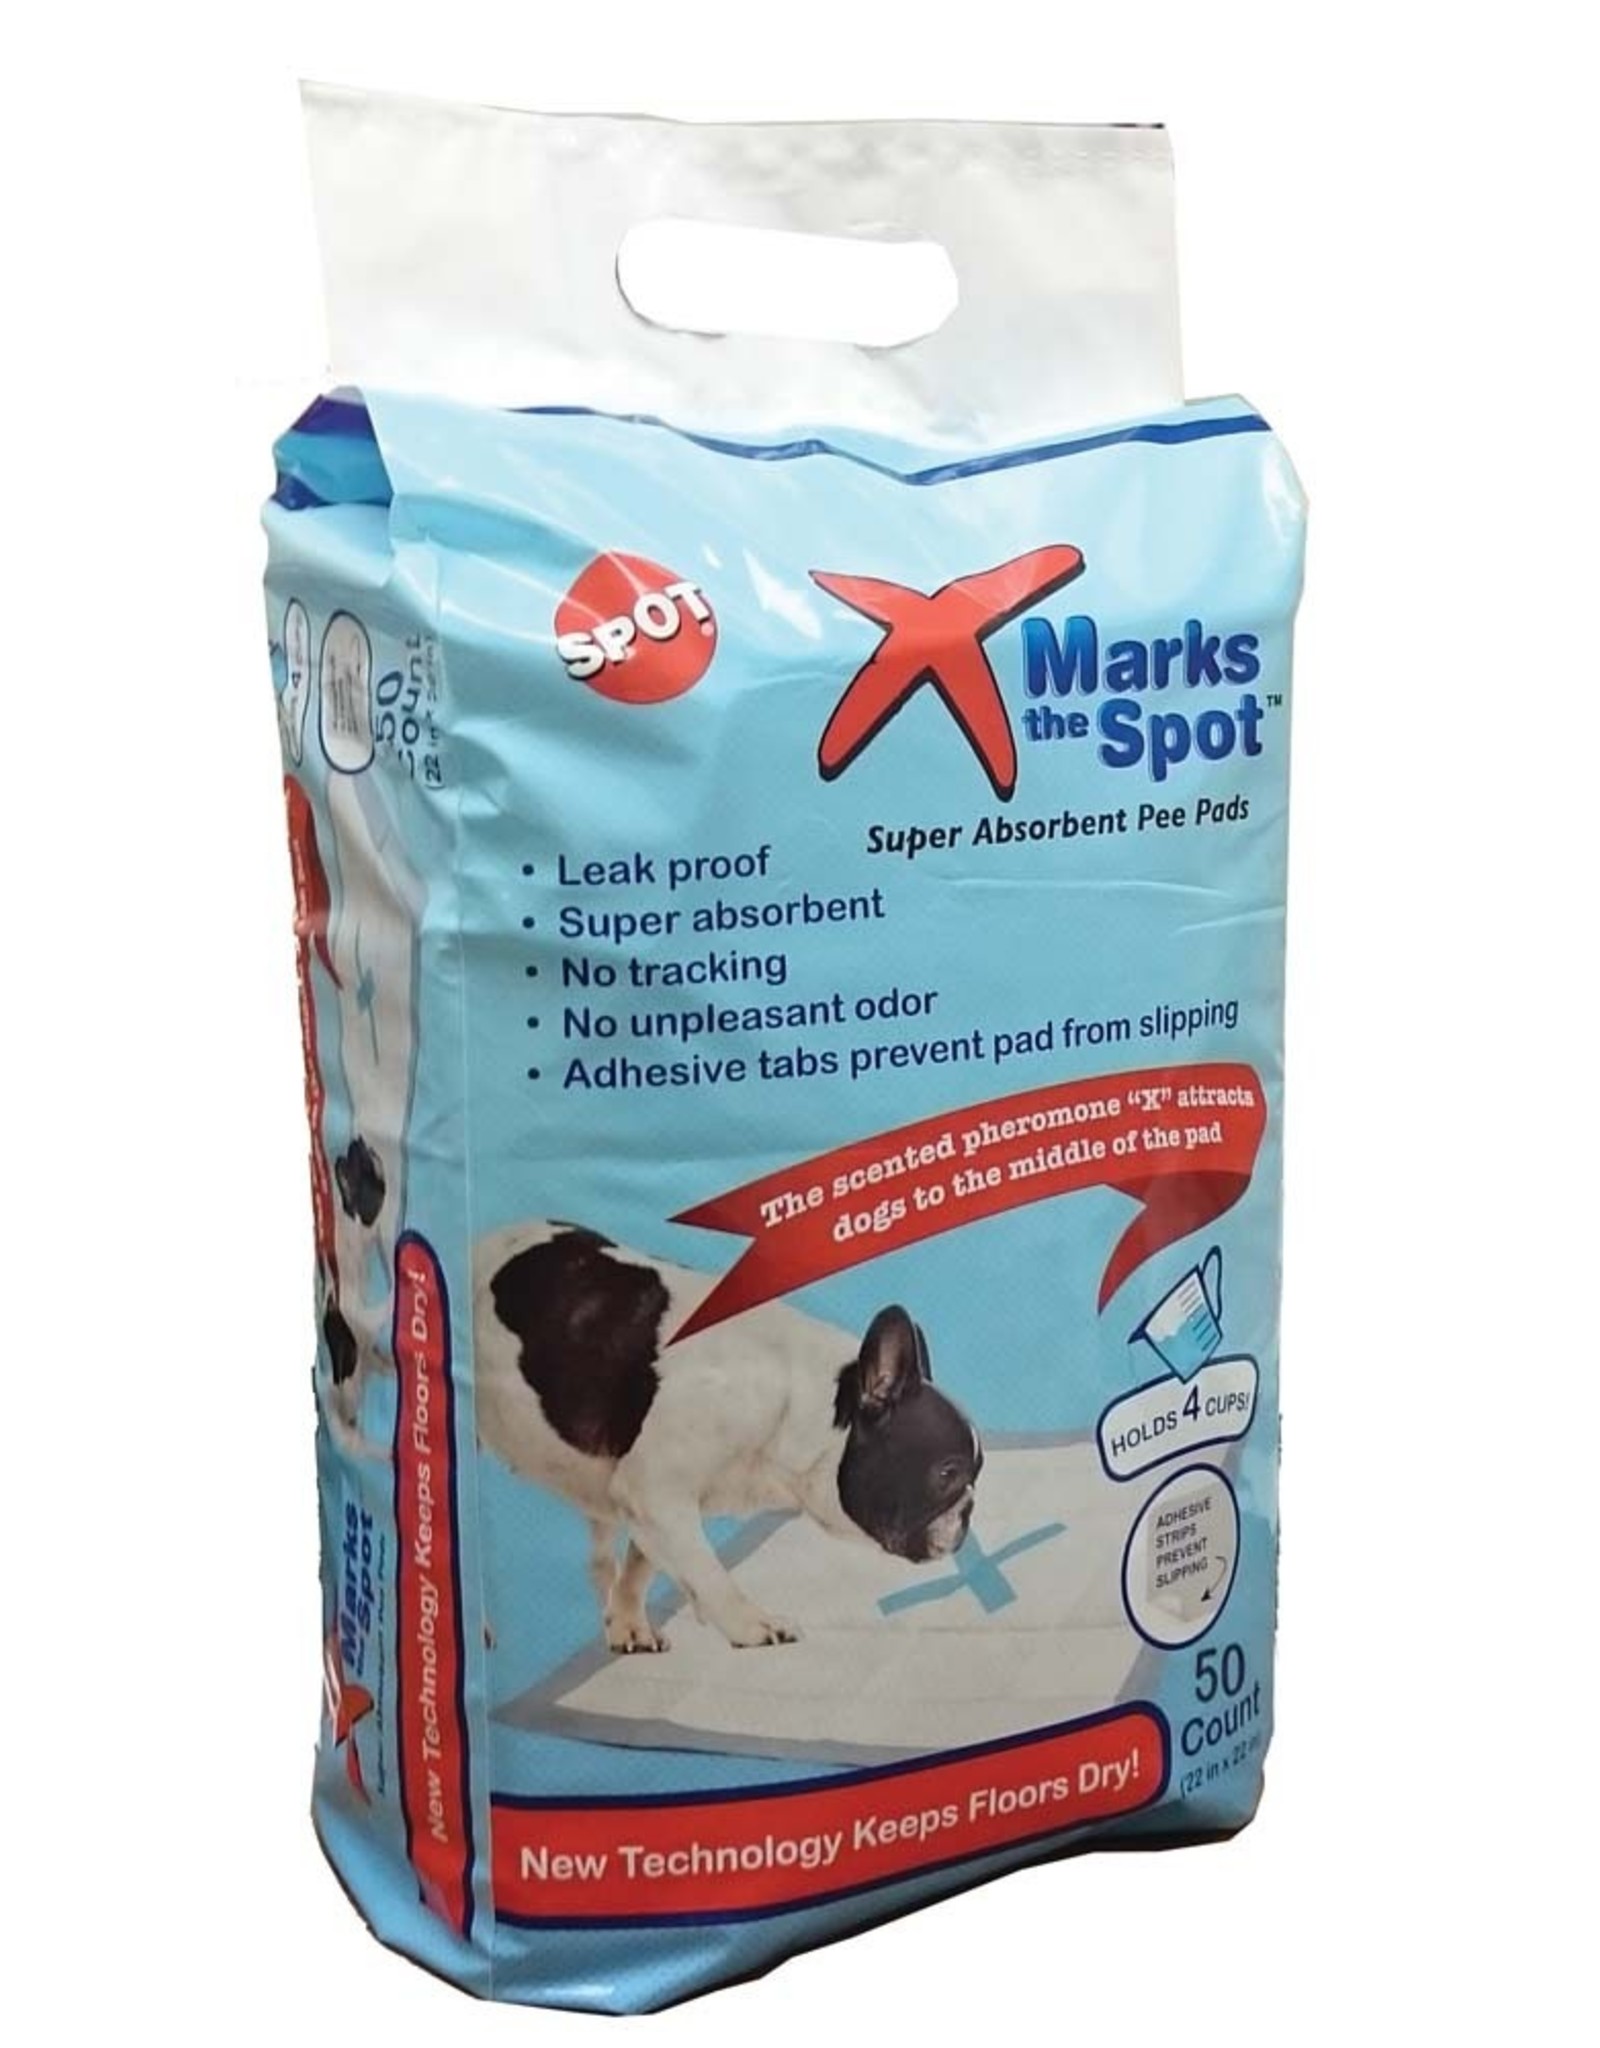 Ethical Products Spot X Marks the Spot Super Absorbent Pee Pads